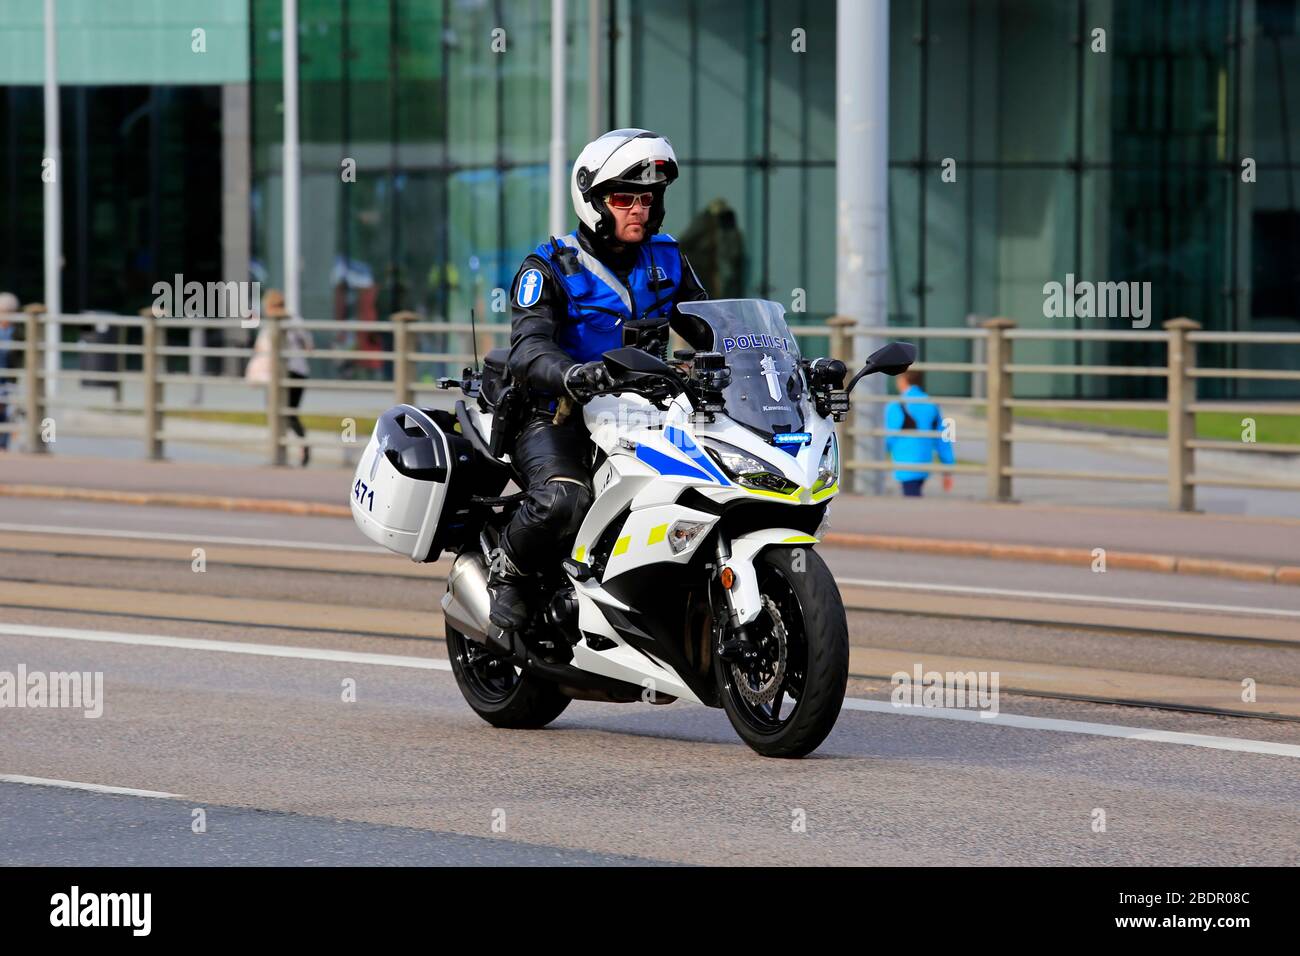 Helsinki, Finland. August 21, 2019. Motorcycle policeman in central Helsinki on the day of Russian President Vladimir Putin's visit. Stock Photo